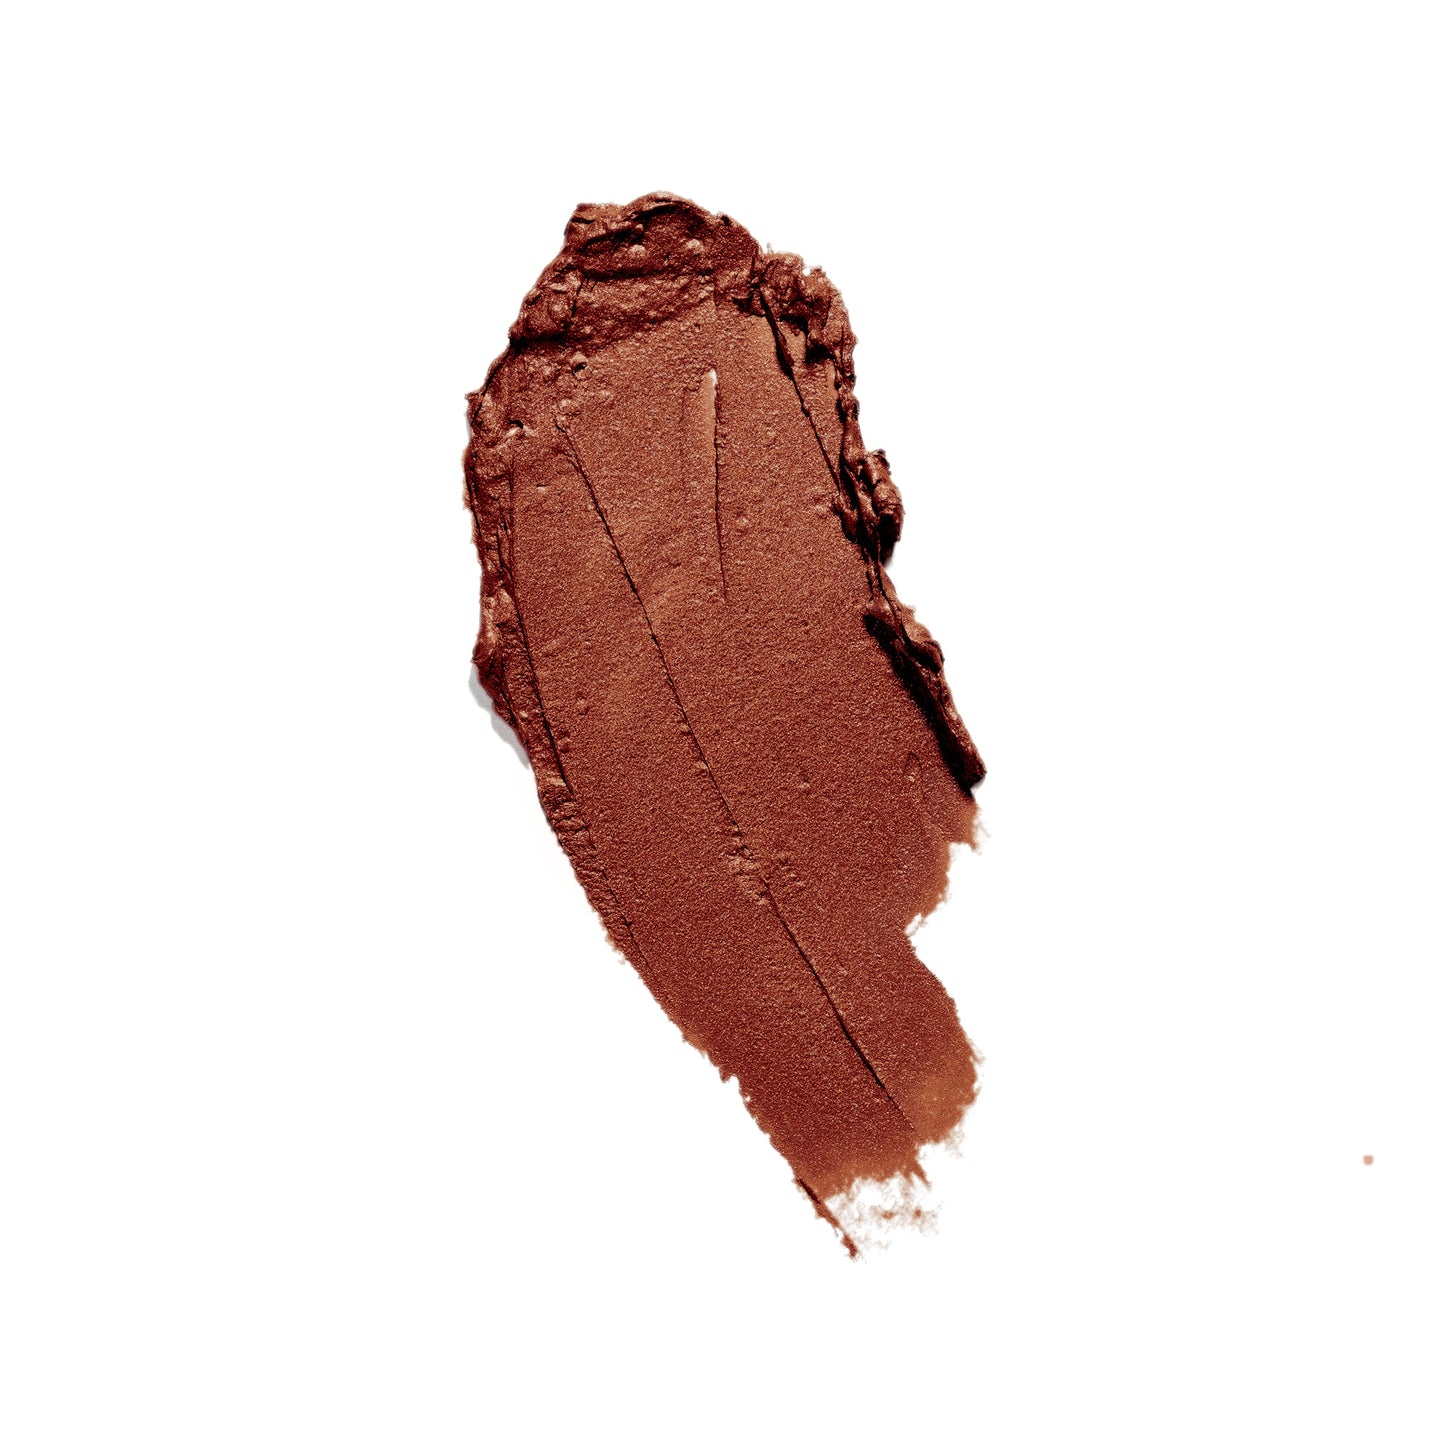 High-resolution image of a satin swatch lipstick against a white backdrop